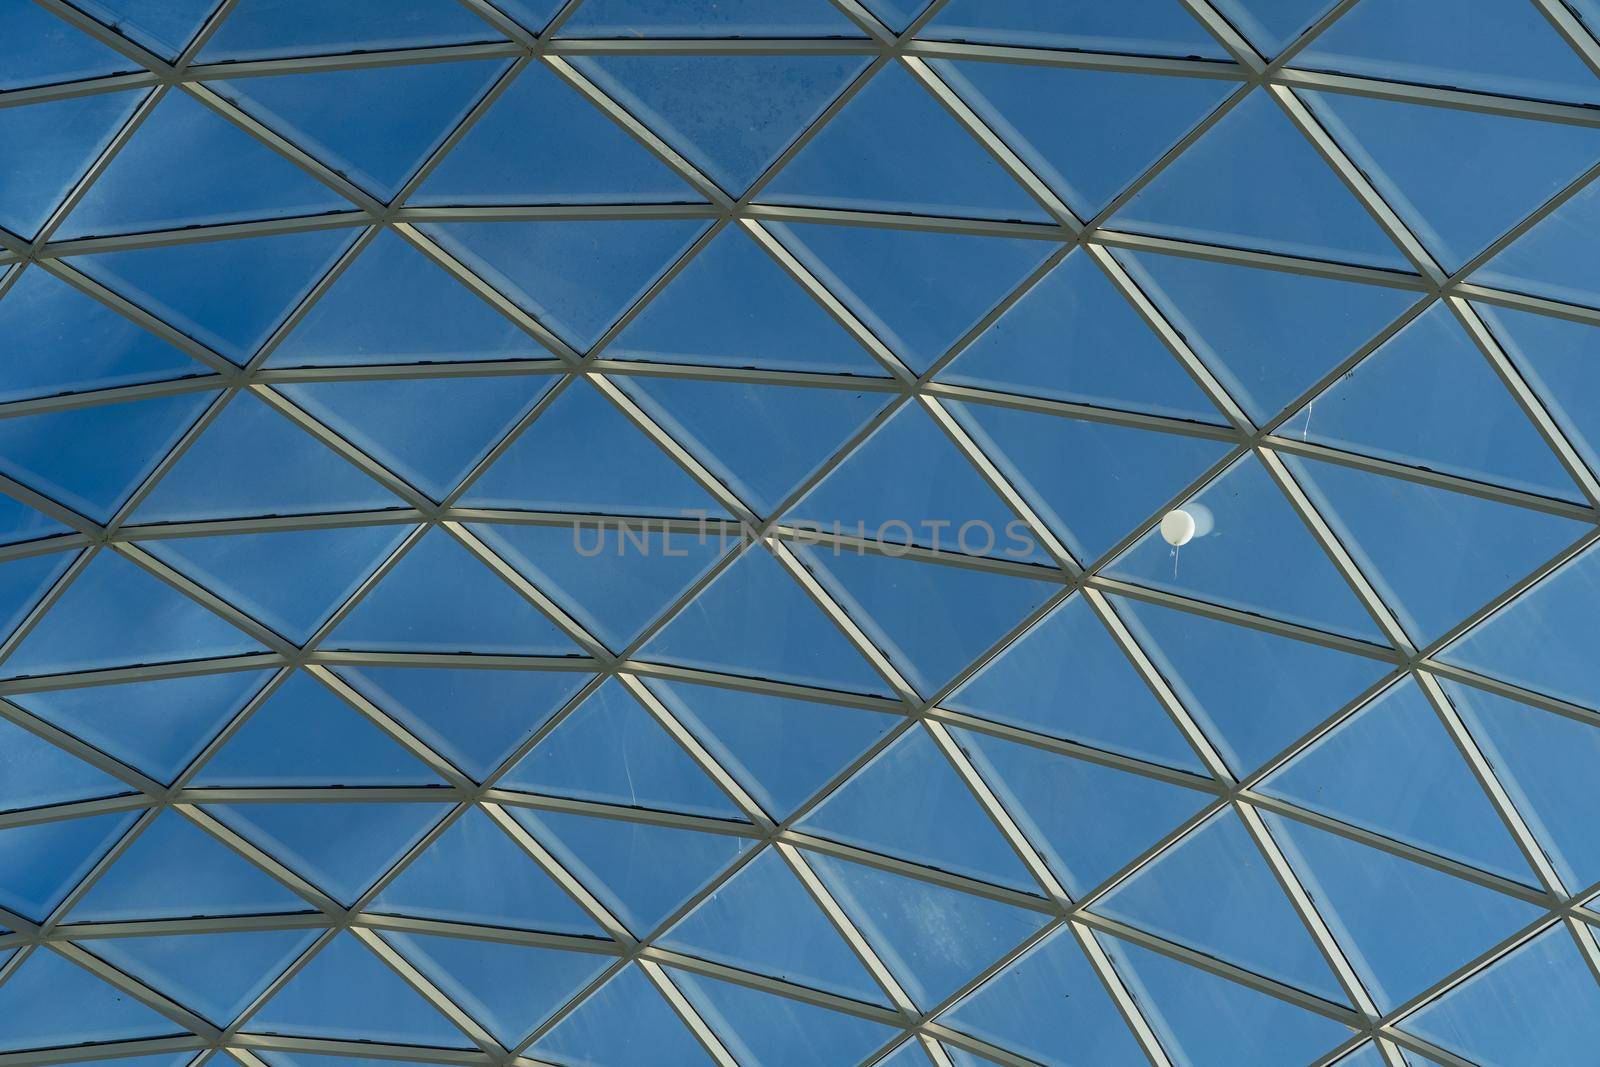 Transparent glass roof of a modern shopping center and a white balloon under it